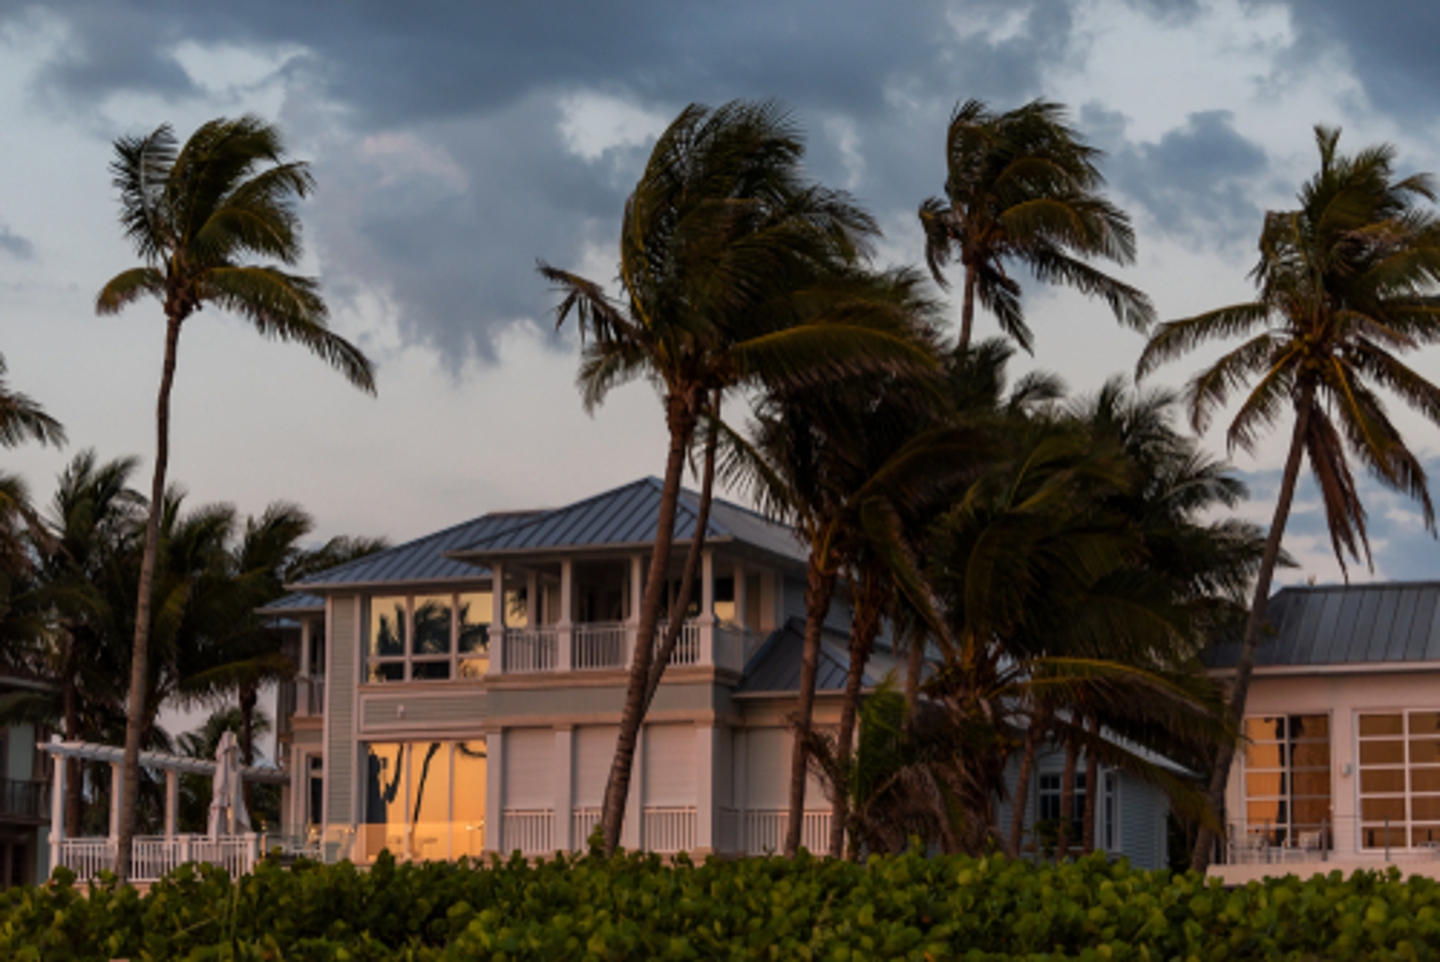 Storm surge can be one of the most damaging elements of a hurricane or typhoon. SERVPRO is always available to help when you need emergency water damage restoration or storm damage restoration.